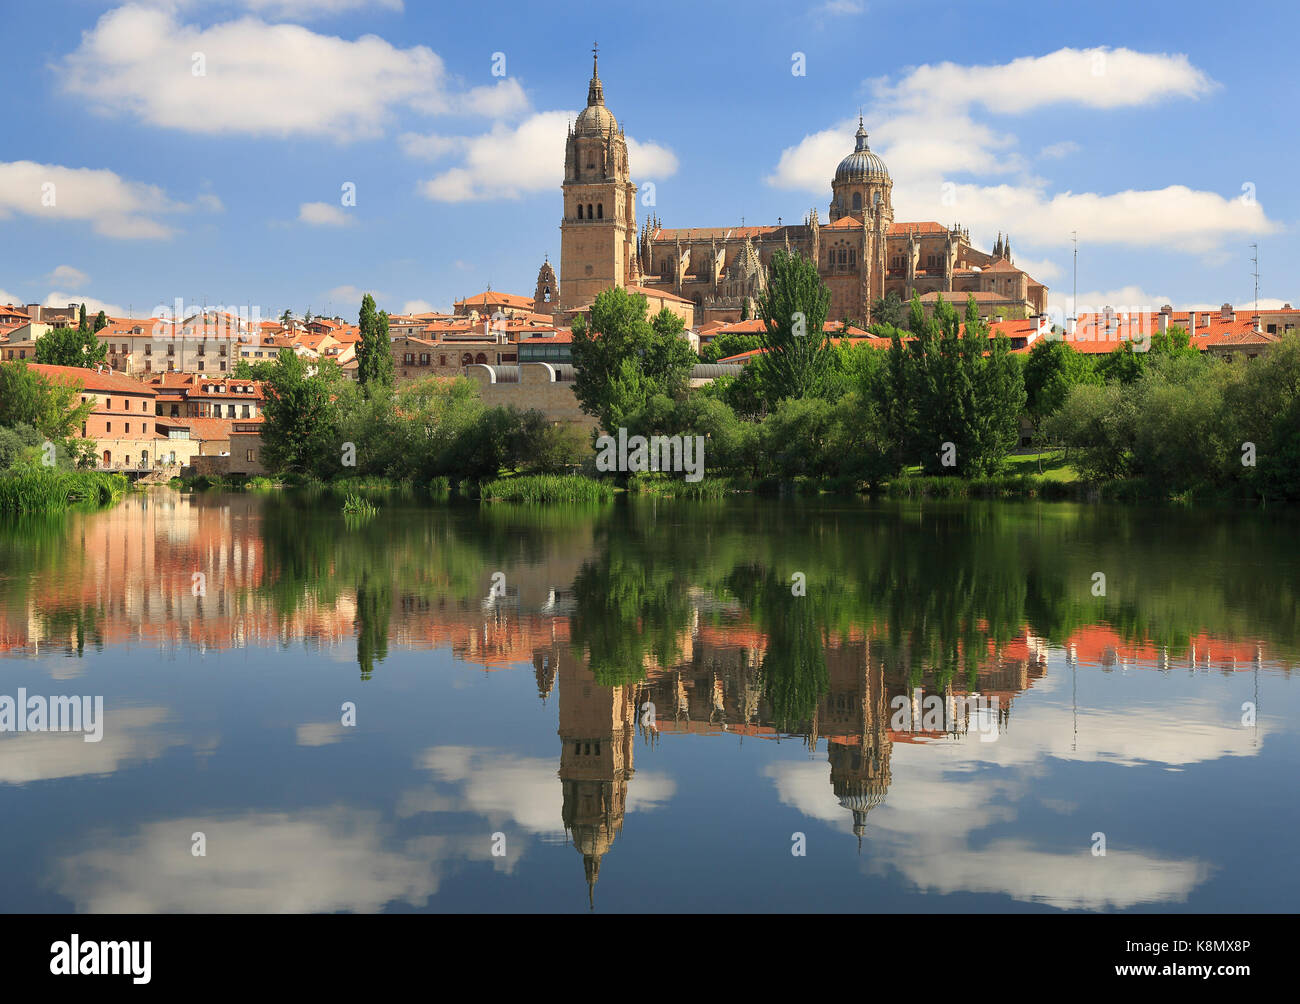 Salamanca Old and New Cathedrals reflected on Tormes River Stock Photo